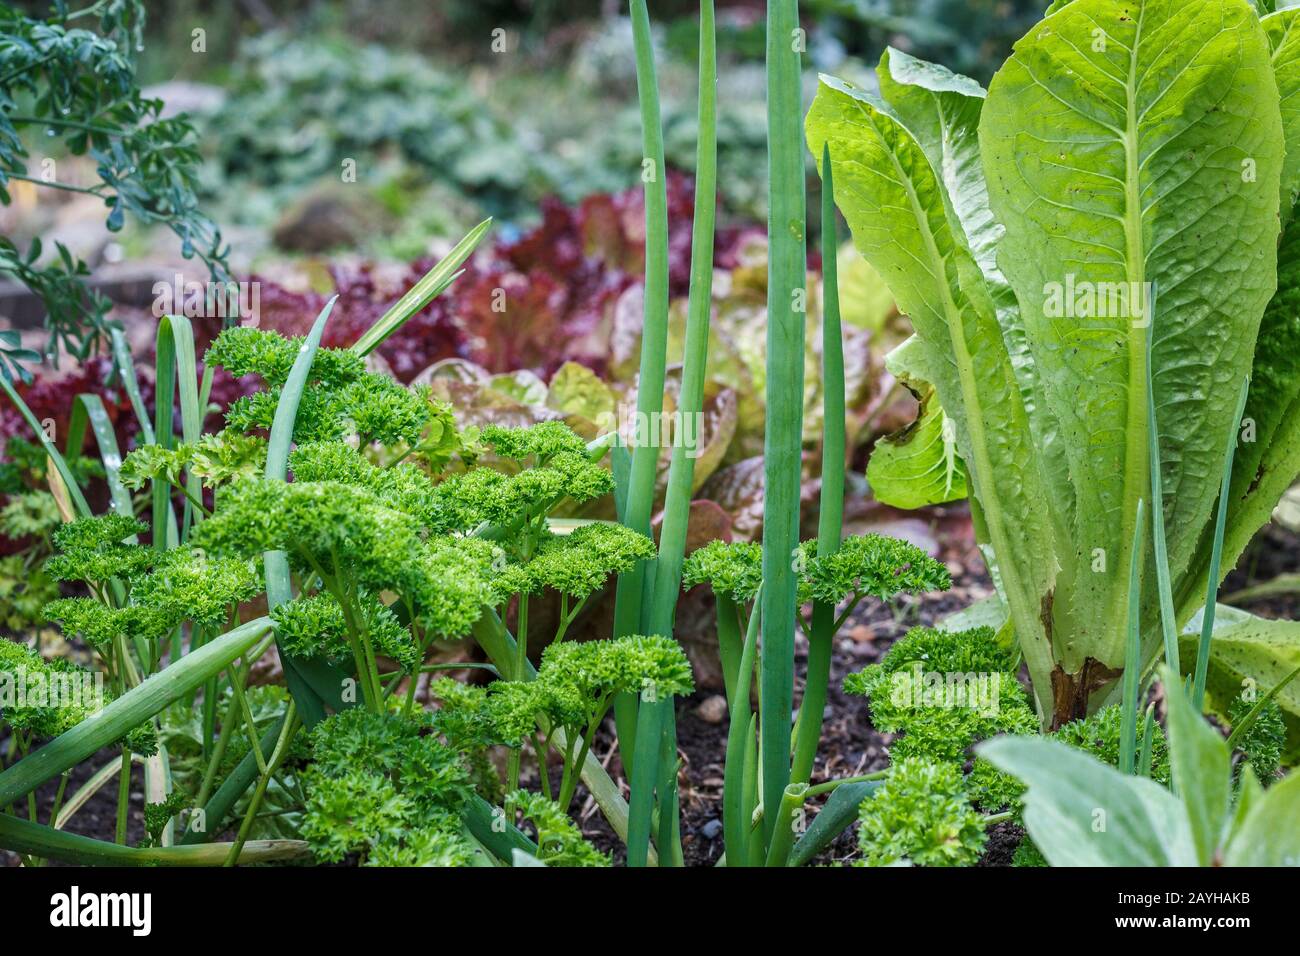 Scallions, parsley and cos (romaine) lettuce grow in a densely planted backyard garden in autumn, with other leafy greens and herbs in the background. Stock Photo